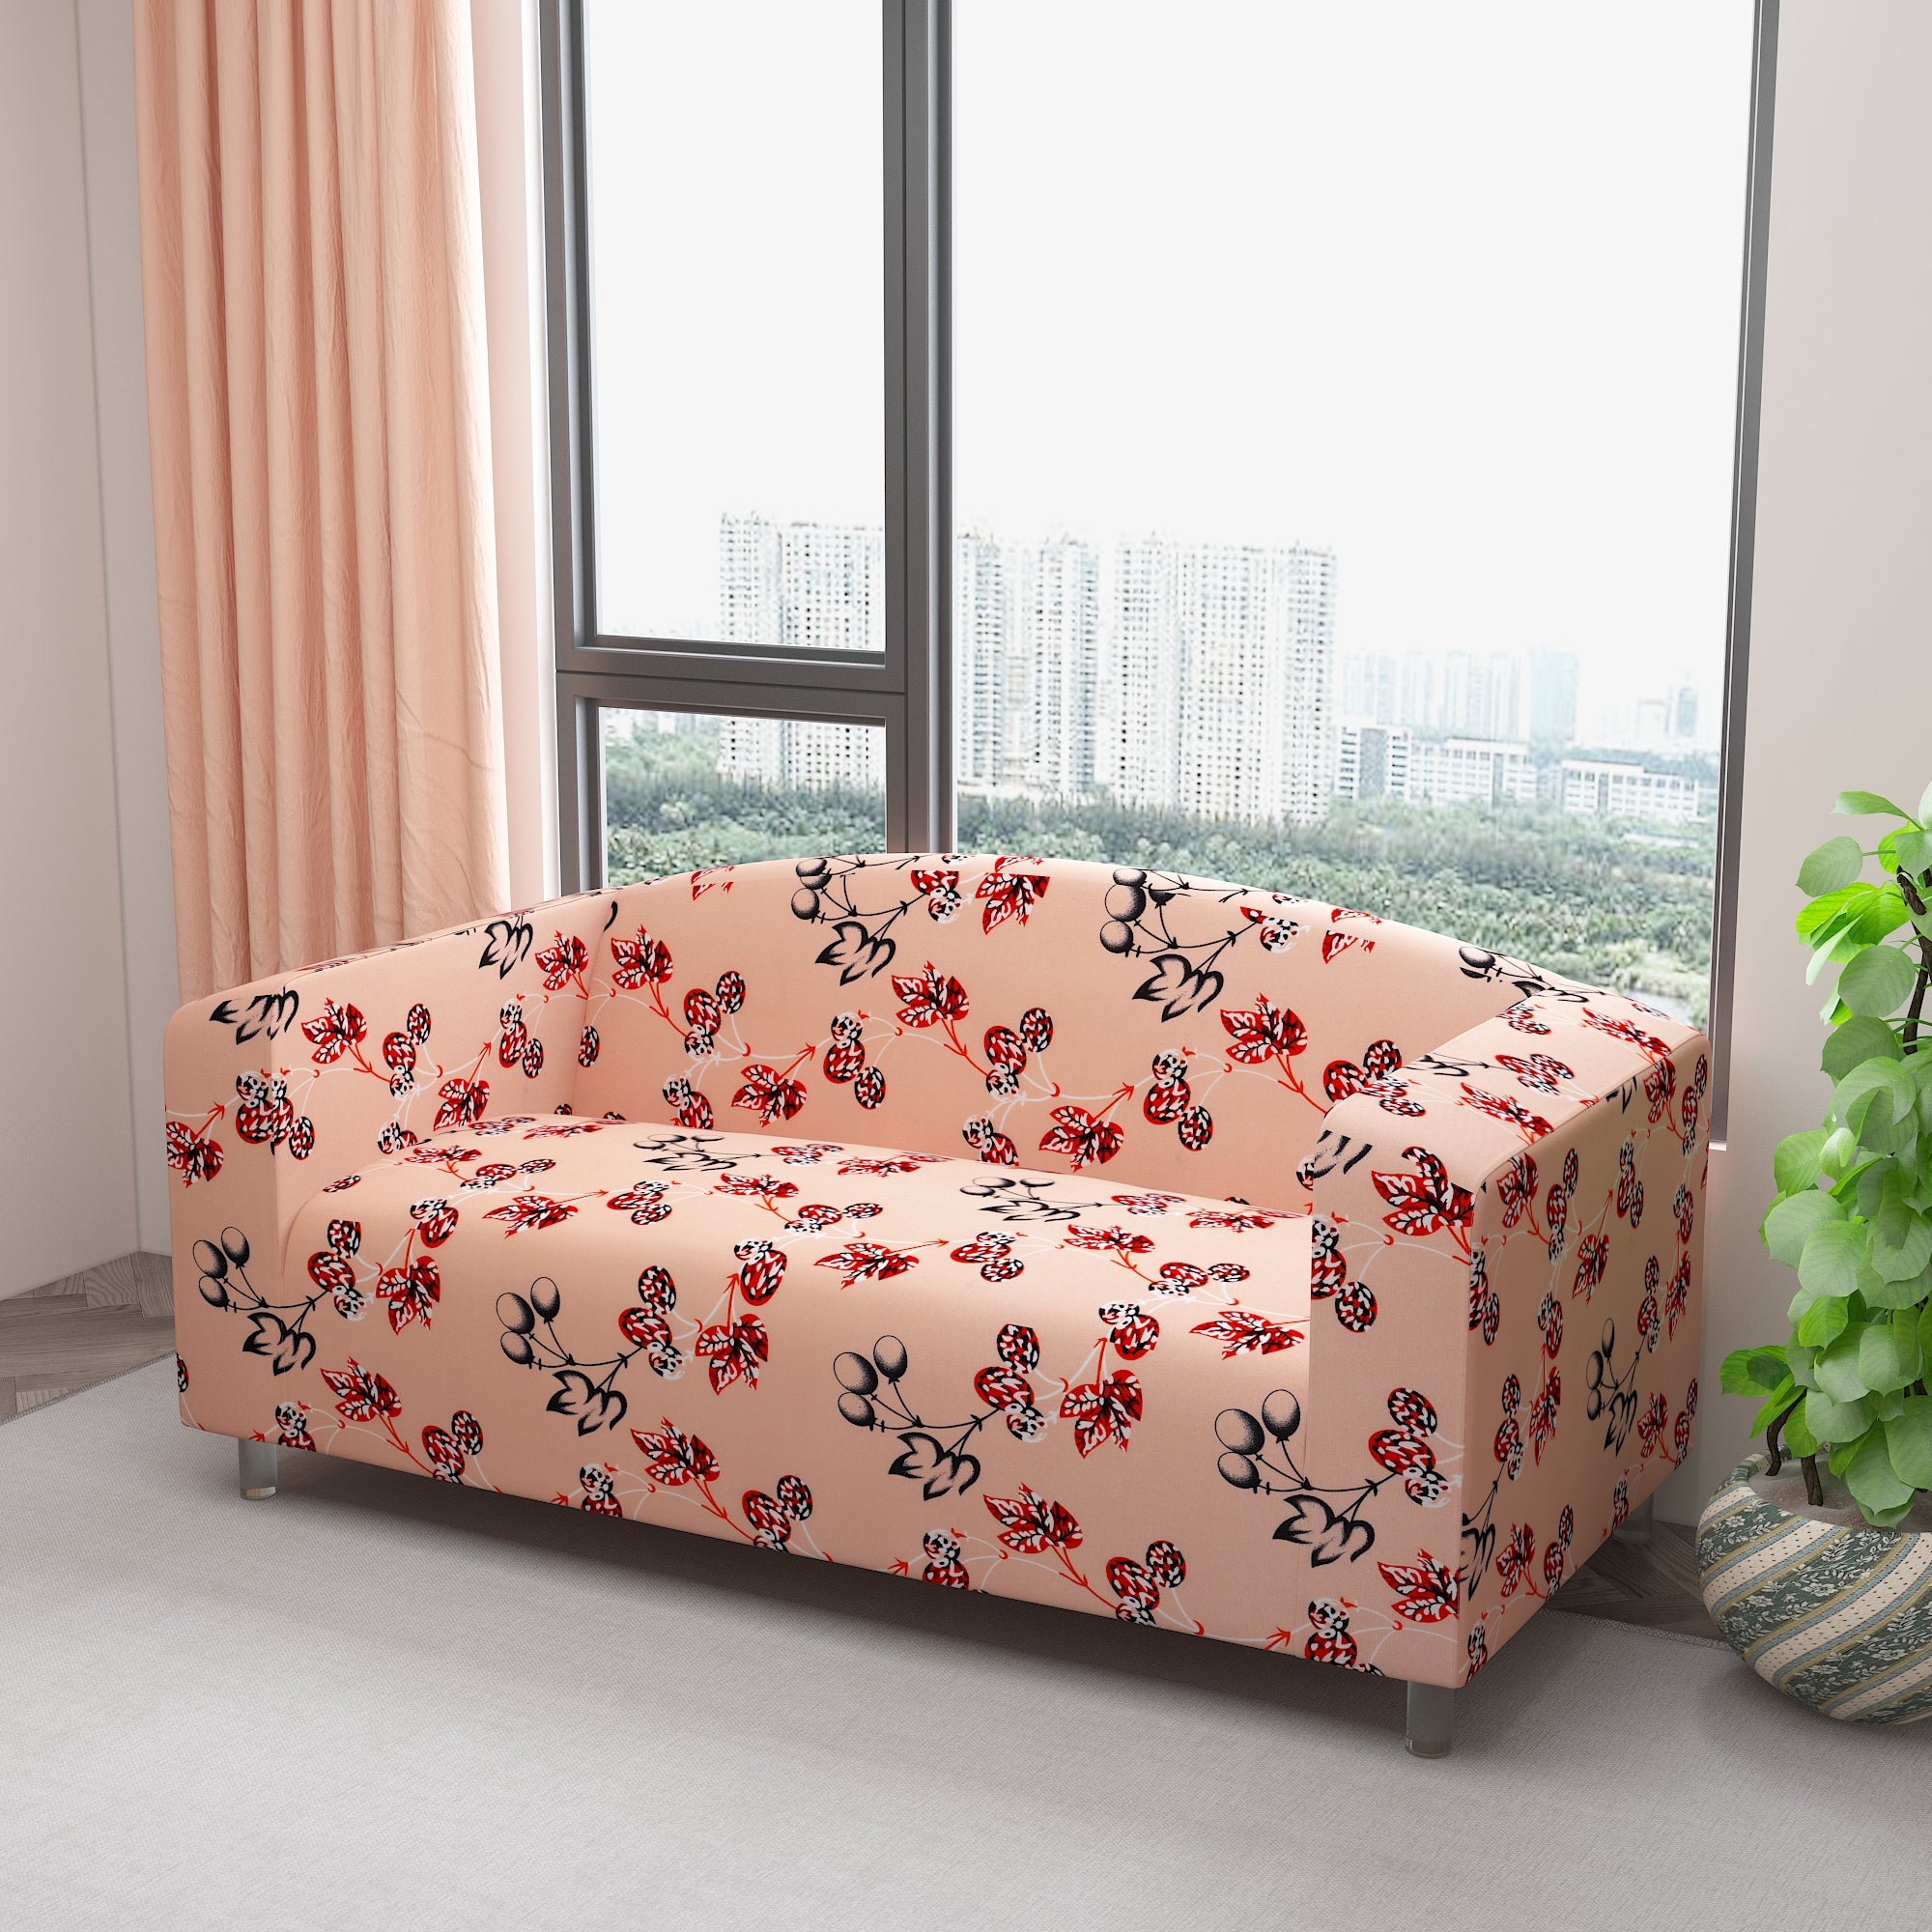 Waterproof Printed Sofa Protector Cover Full Stretchable, SP41 - Dream Care Furnishings Private Limited